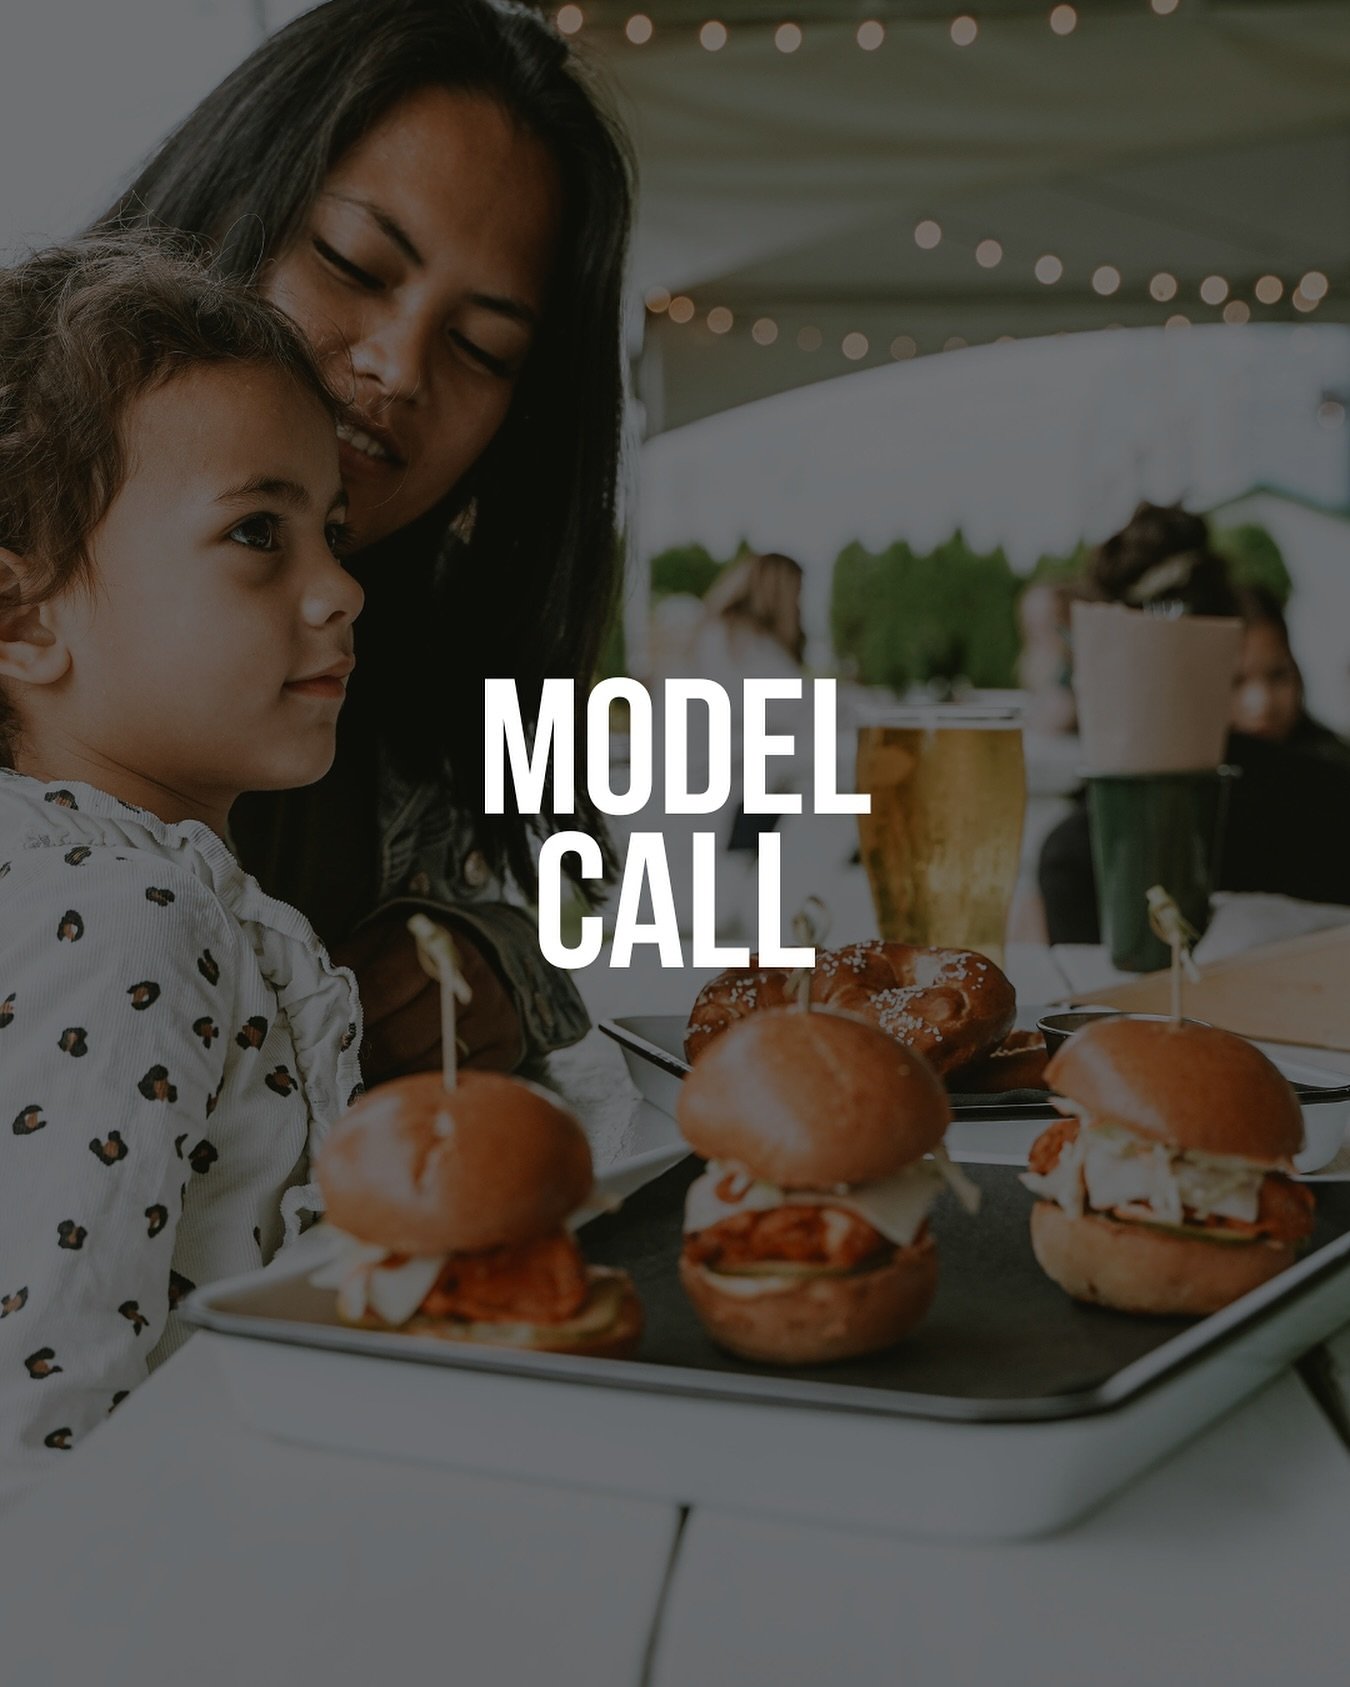 🍺📢 MODEL CALL 📢🍺

We are casting for an @oldyalebrewing shoot in Chilliwack on May 22, from 11AM - 1PM(ish).

THE ROLE:

+ It&rsquo;s going to be TOUGH, y&rsquo;all. You&rsquo;ll be hanging out, eating free food 🍔 &amp; enjoying free drinks 🍹 w